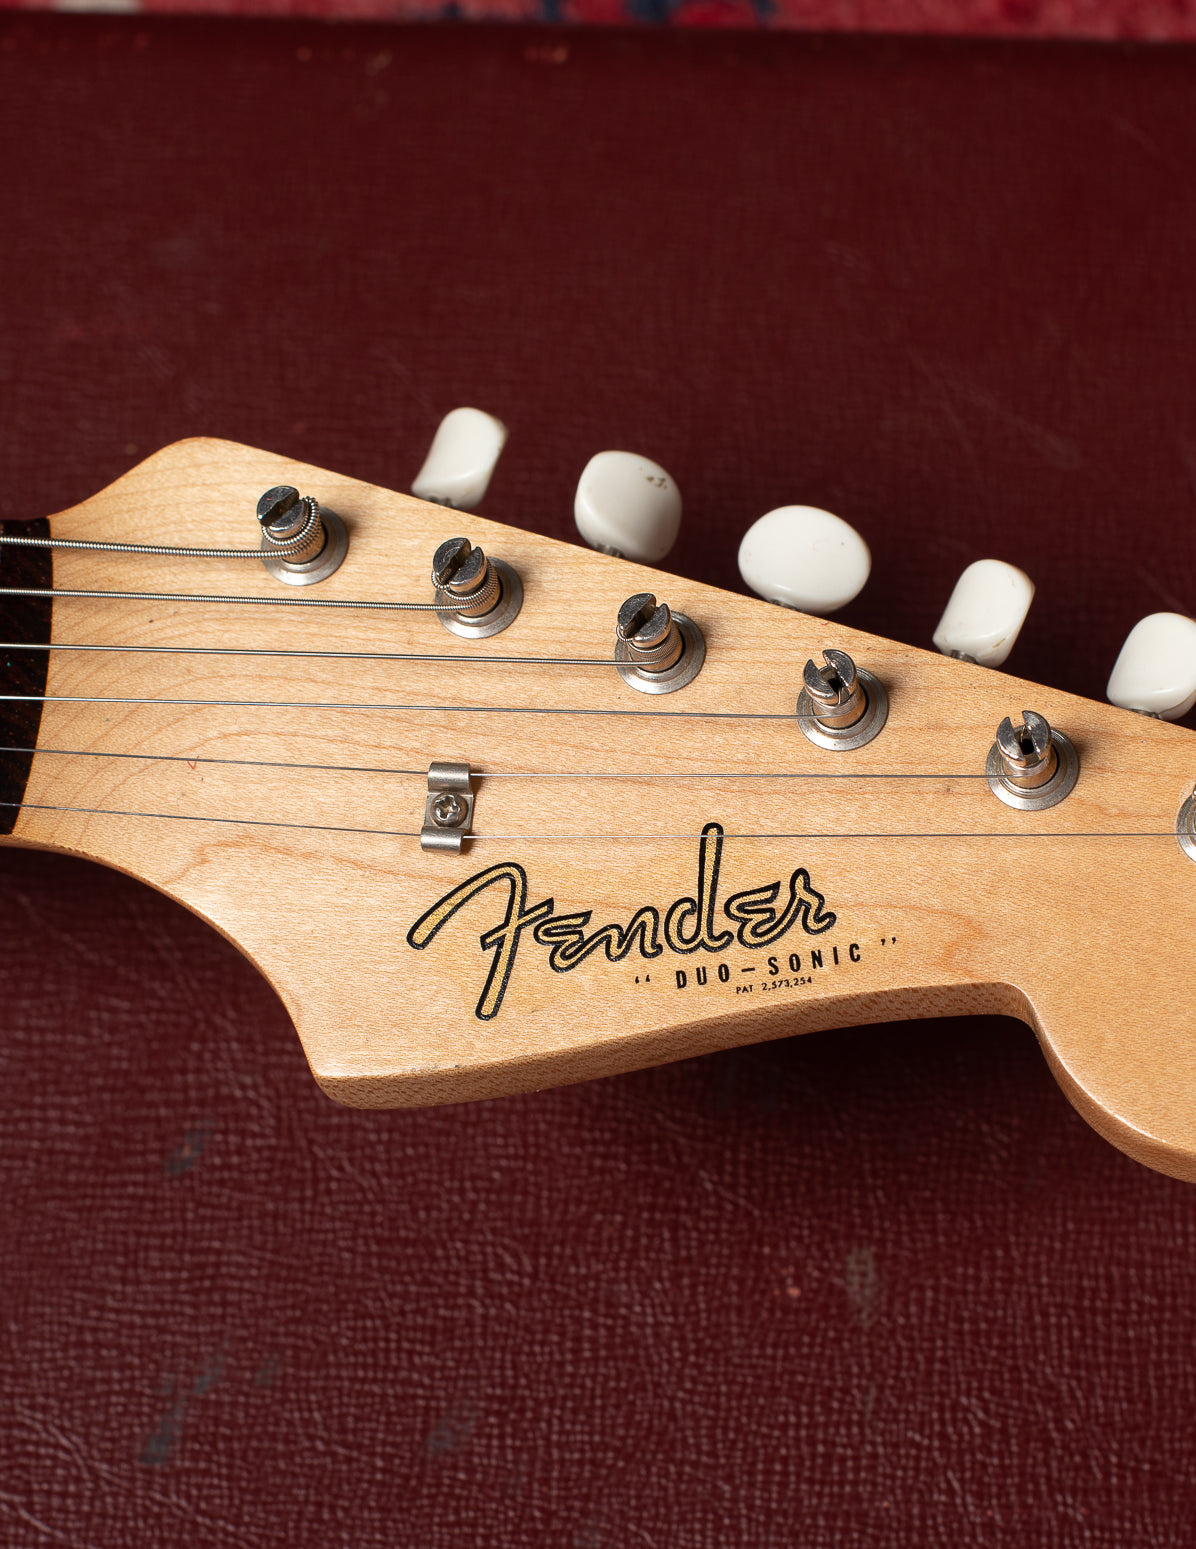 Peghead with spaghetti Fender logo and "Duo - Sonic"